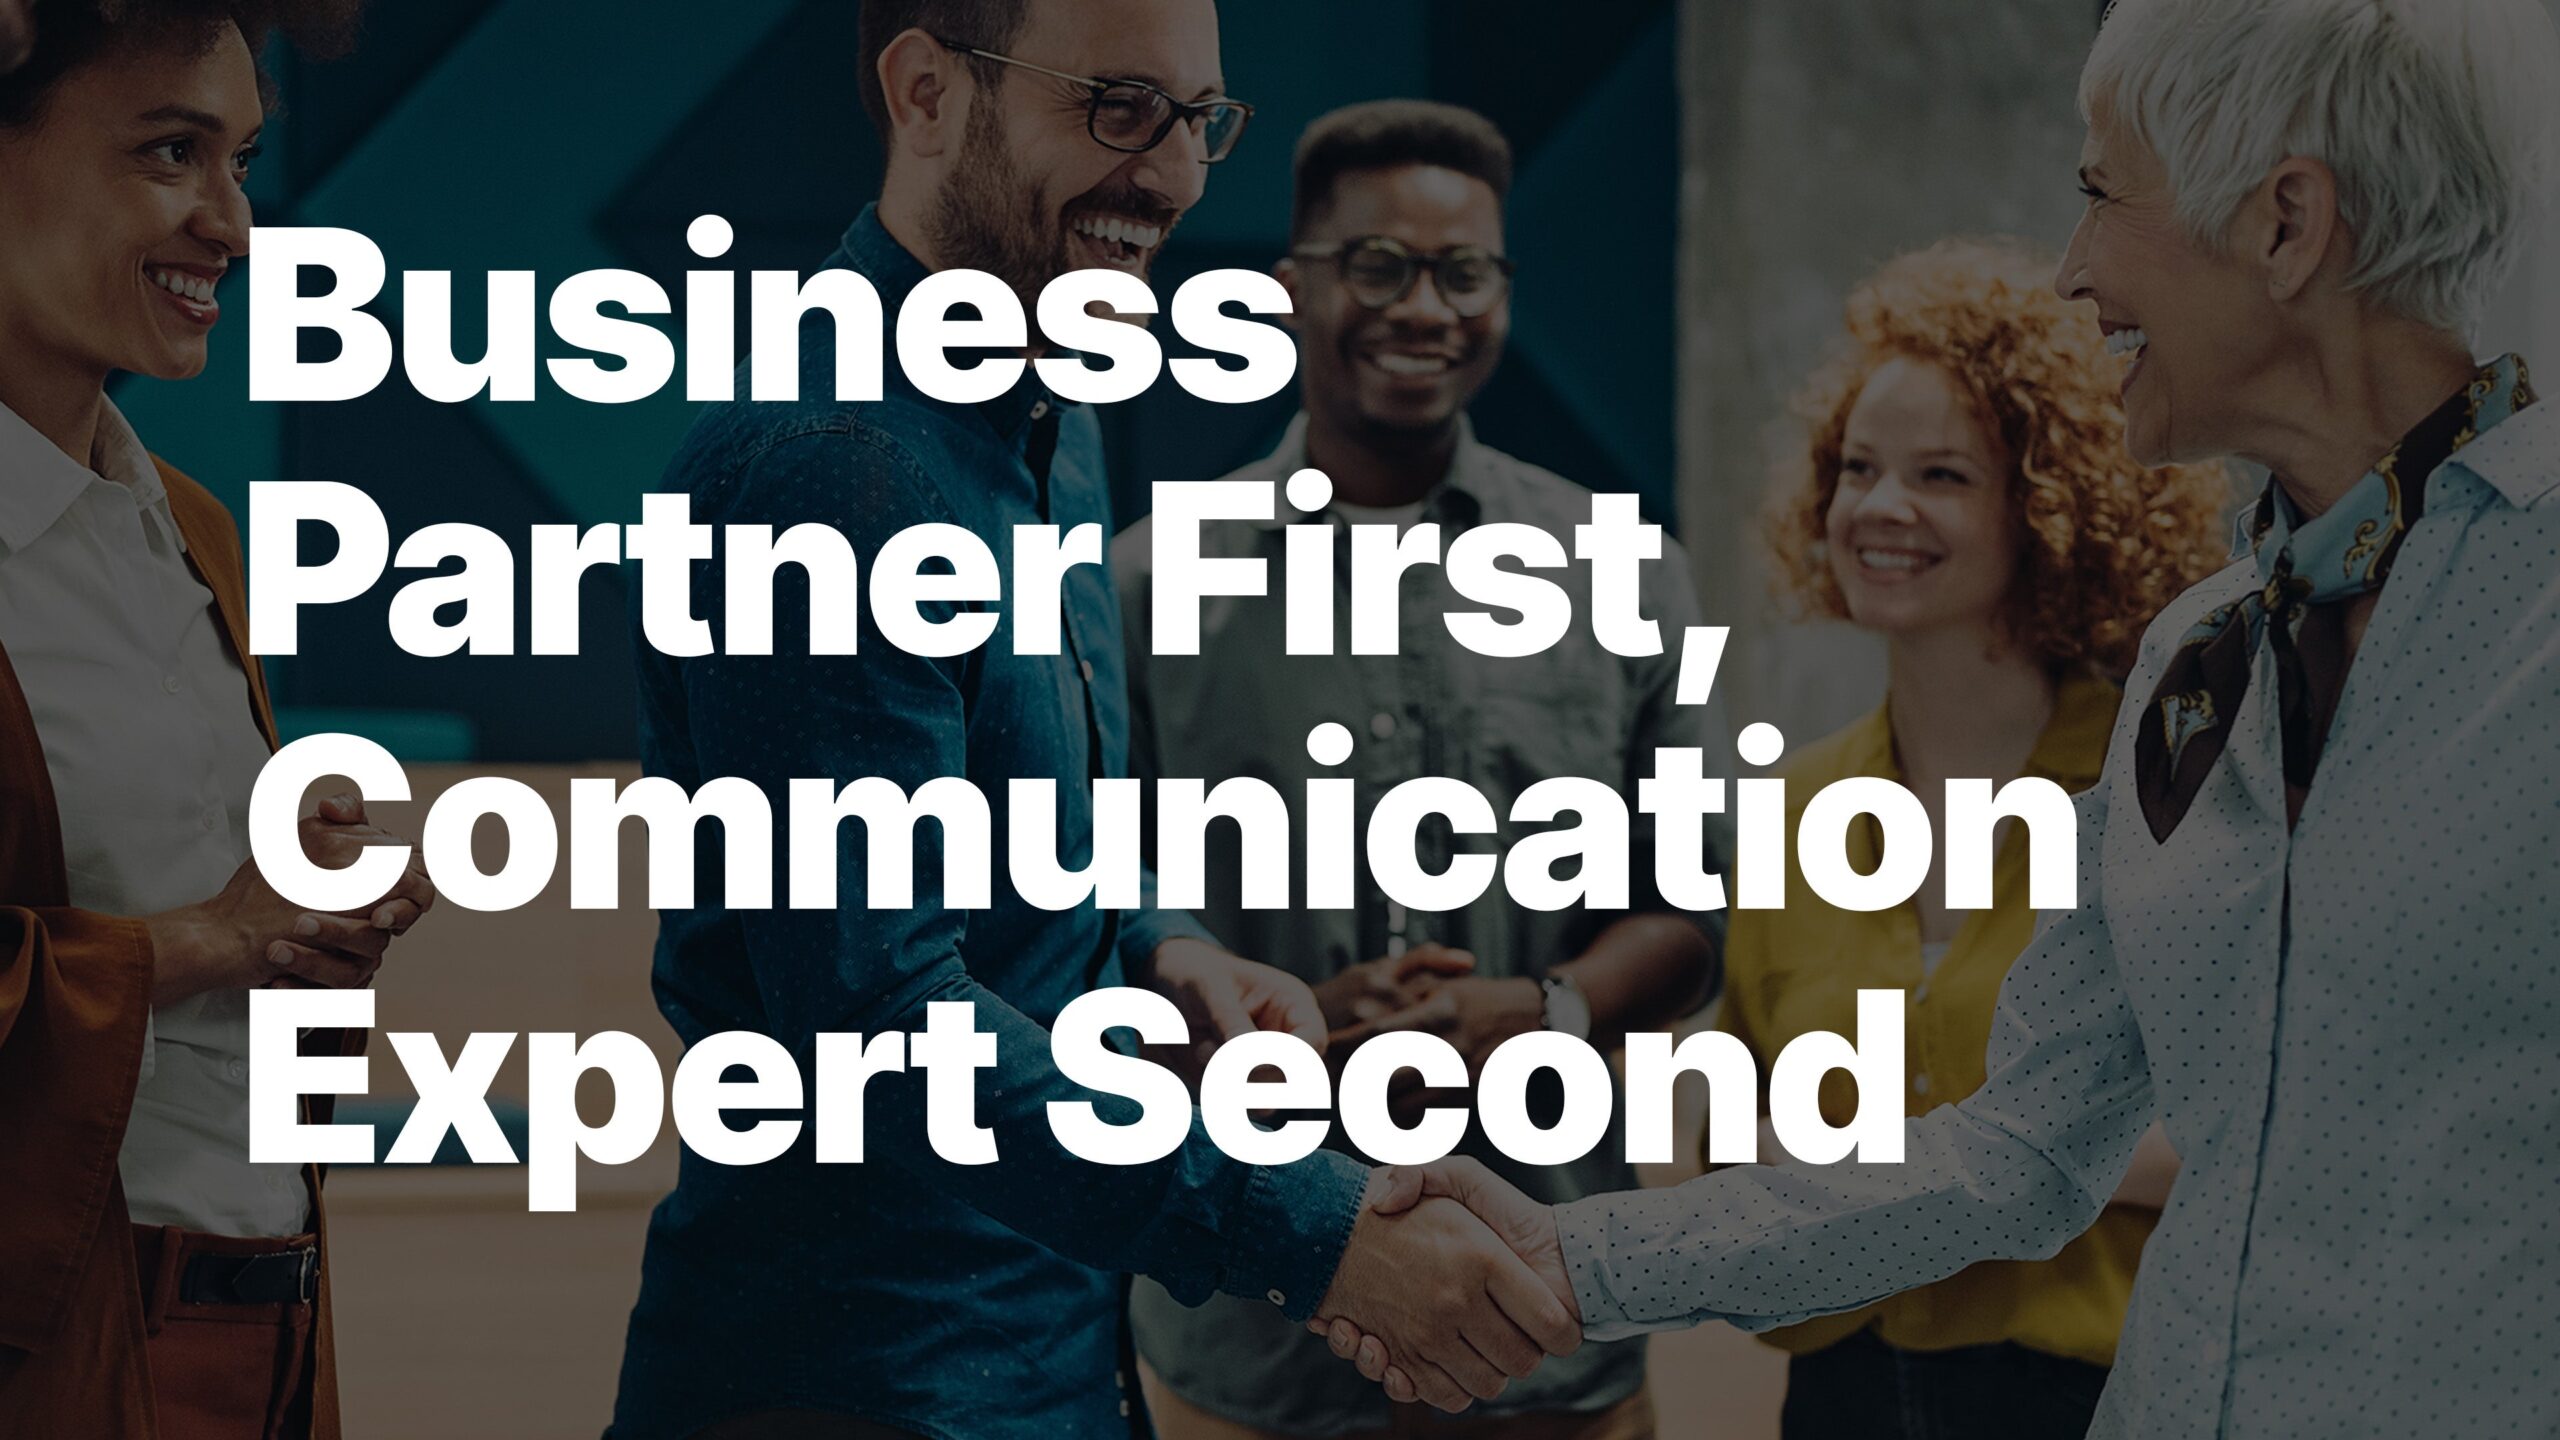 An image that says "business partner first, communication expert second" on a story from Ragan Communications